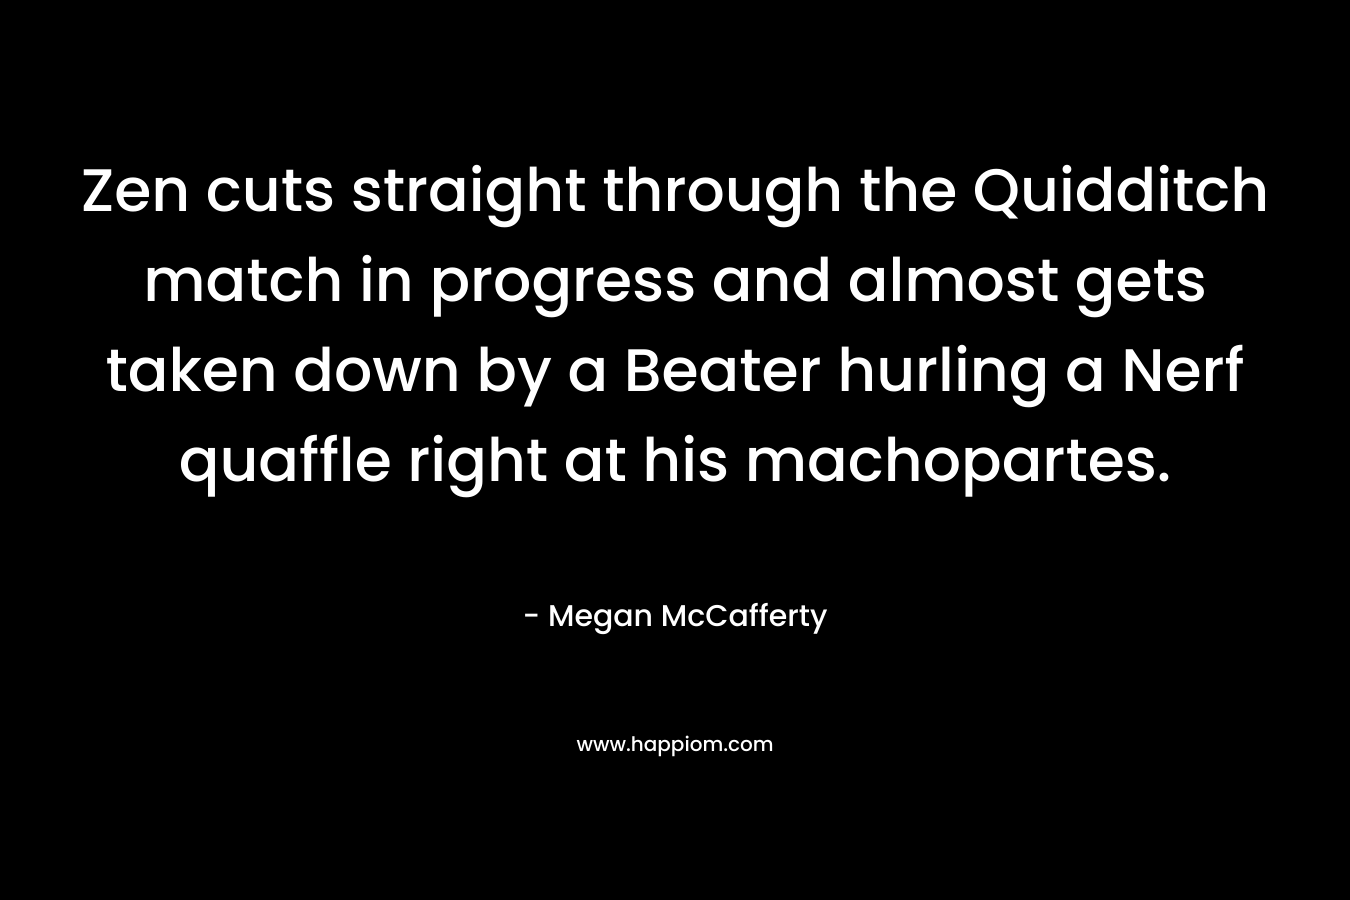 Zen cuts straight through the Quidditch match in progress and almost gets taken down by a Beater hurling a Nerf quaffle right at his machopartes. – Megan McCafferty